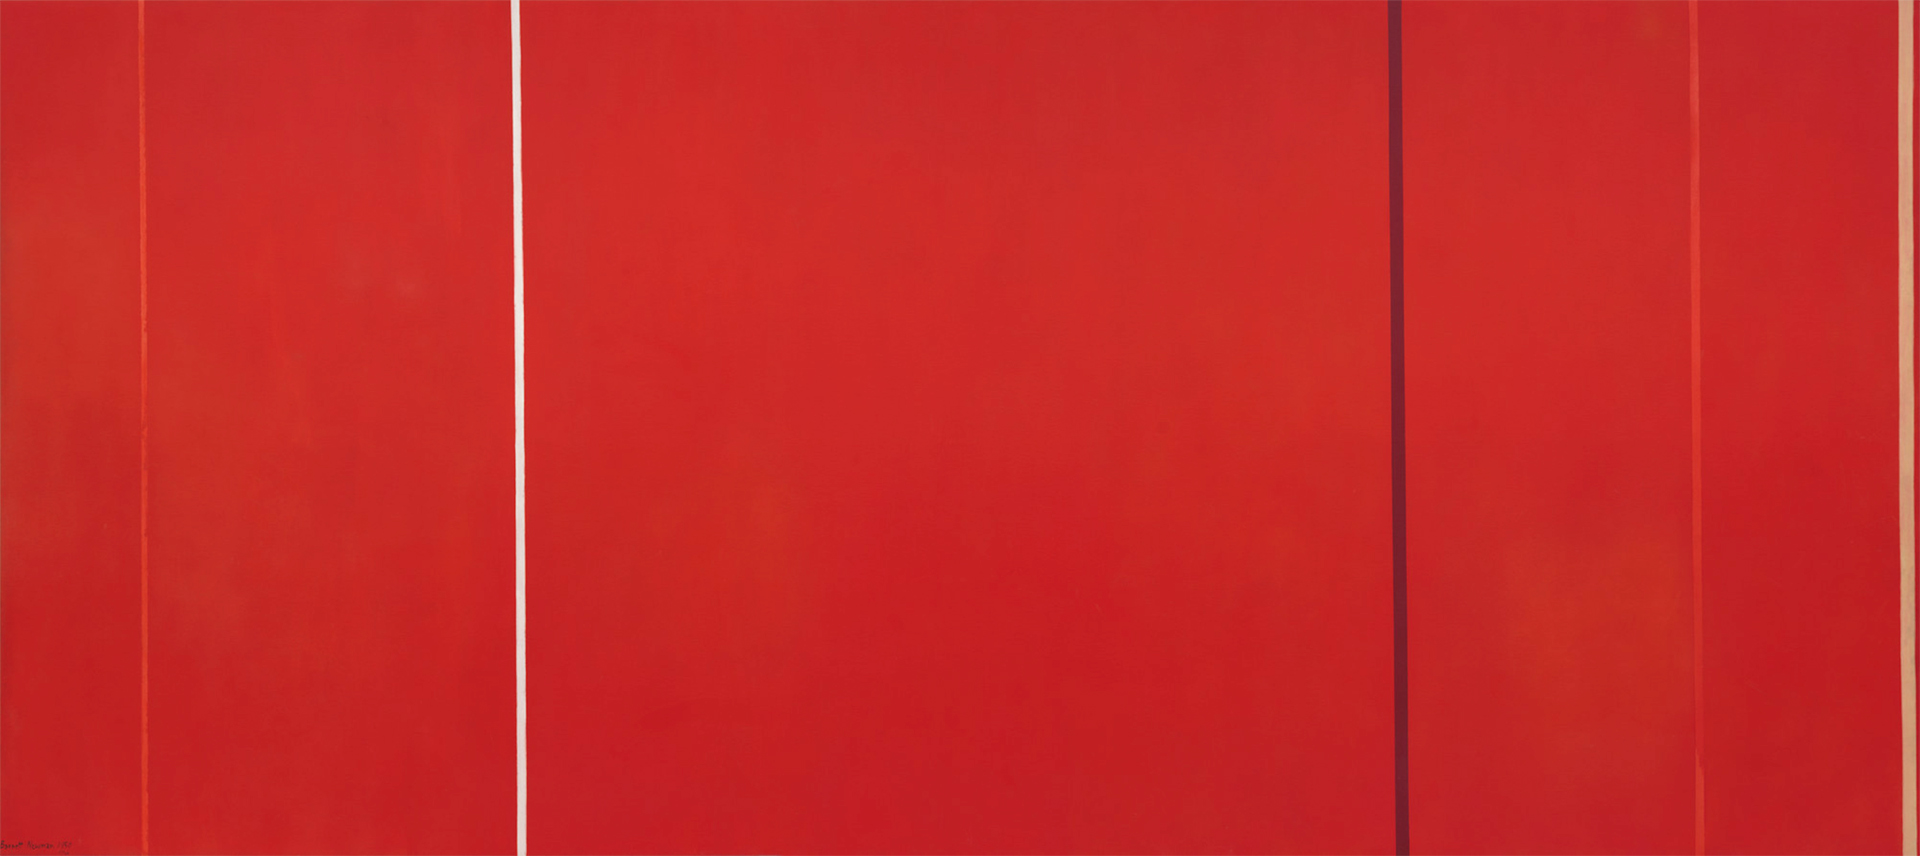 A red monochromatic painting with three vertical sections divided by white and darker red lines.